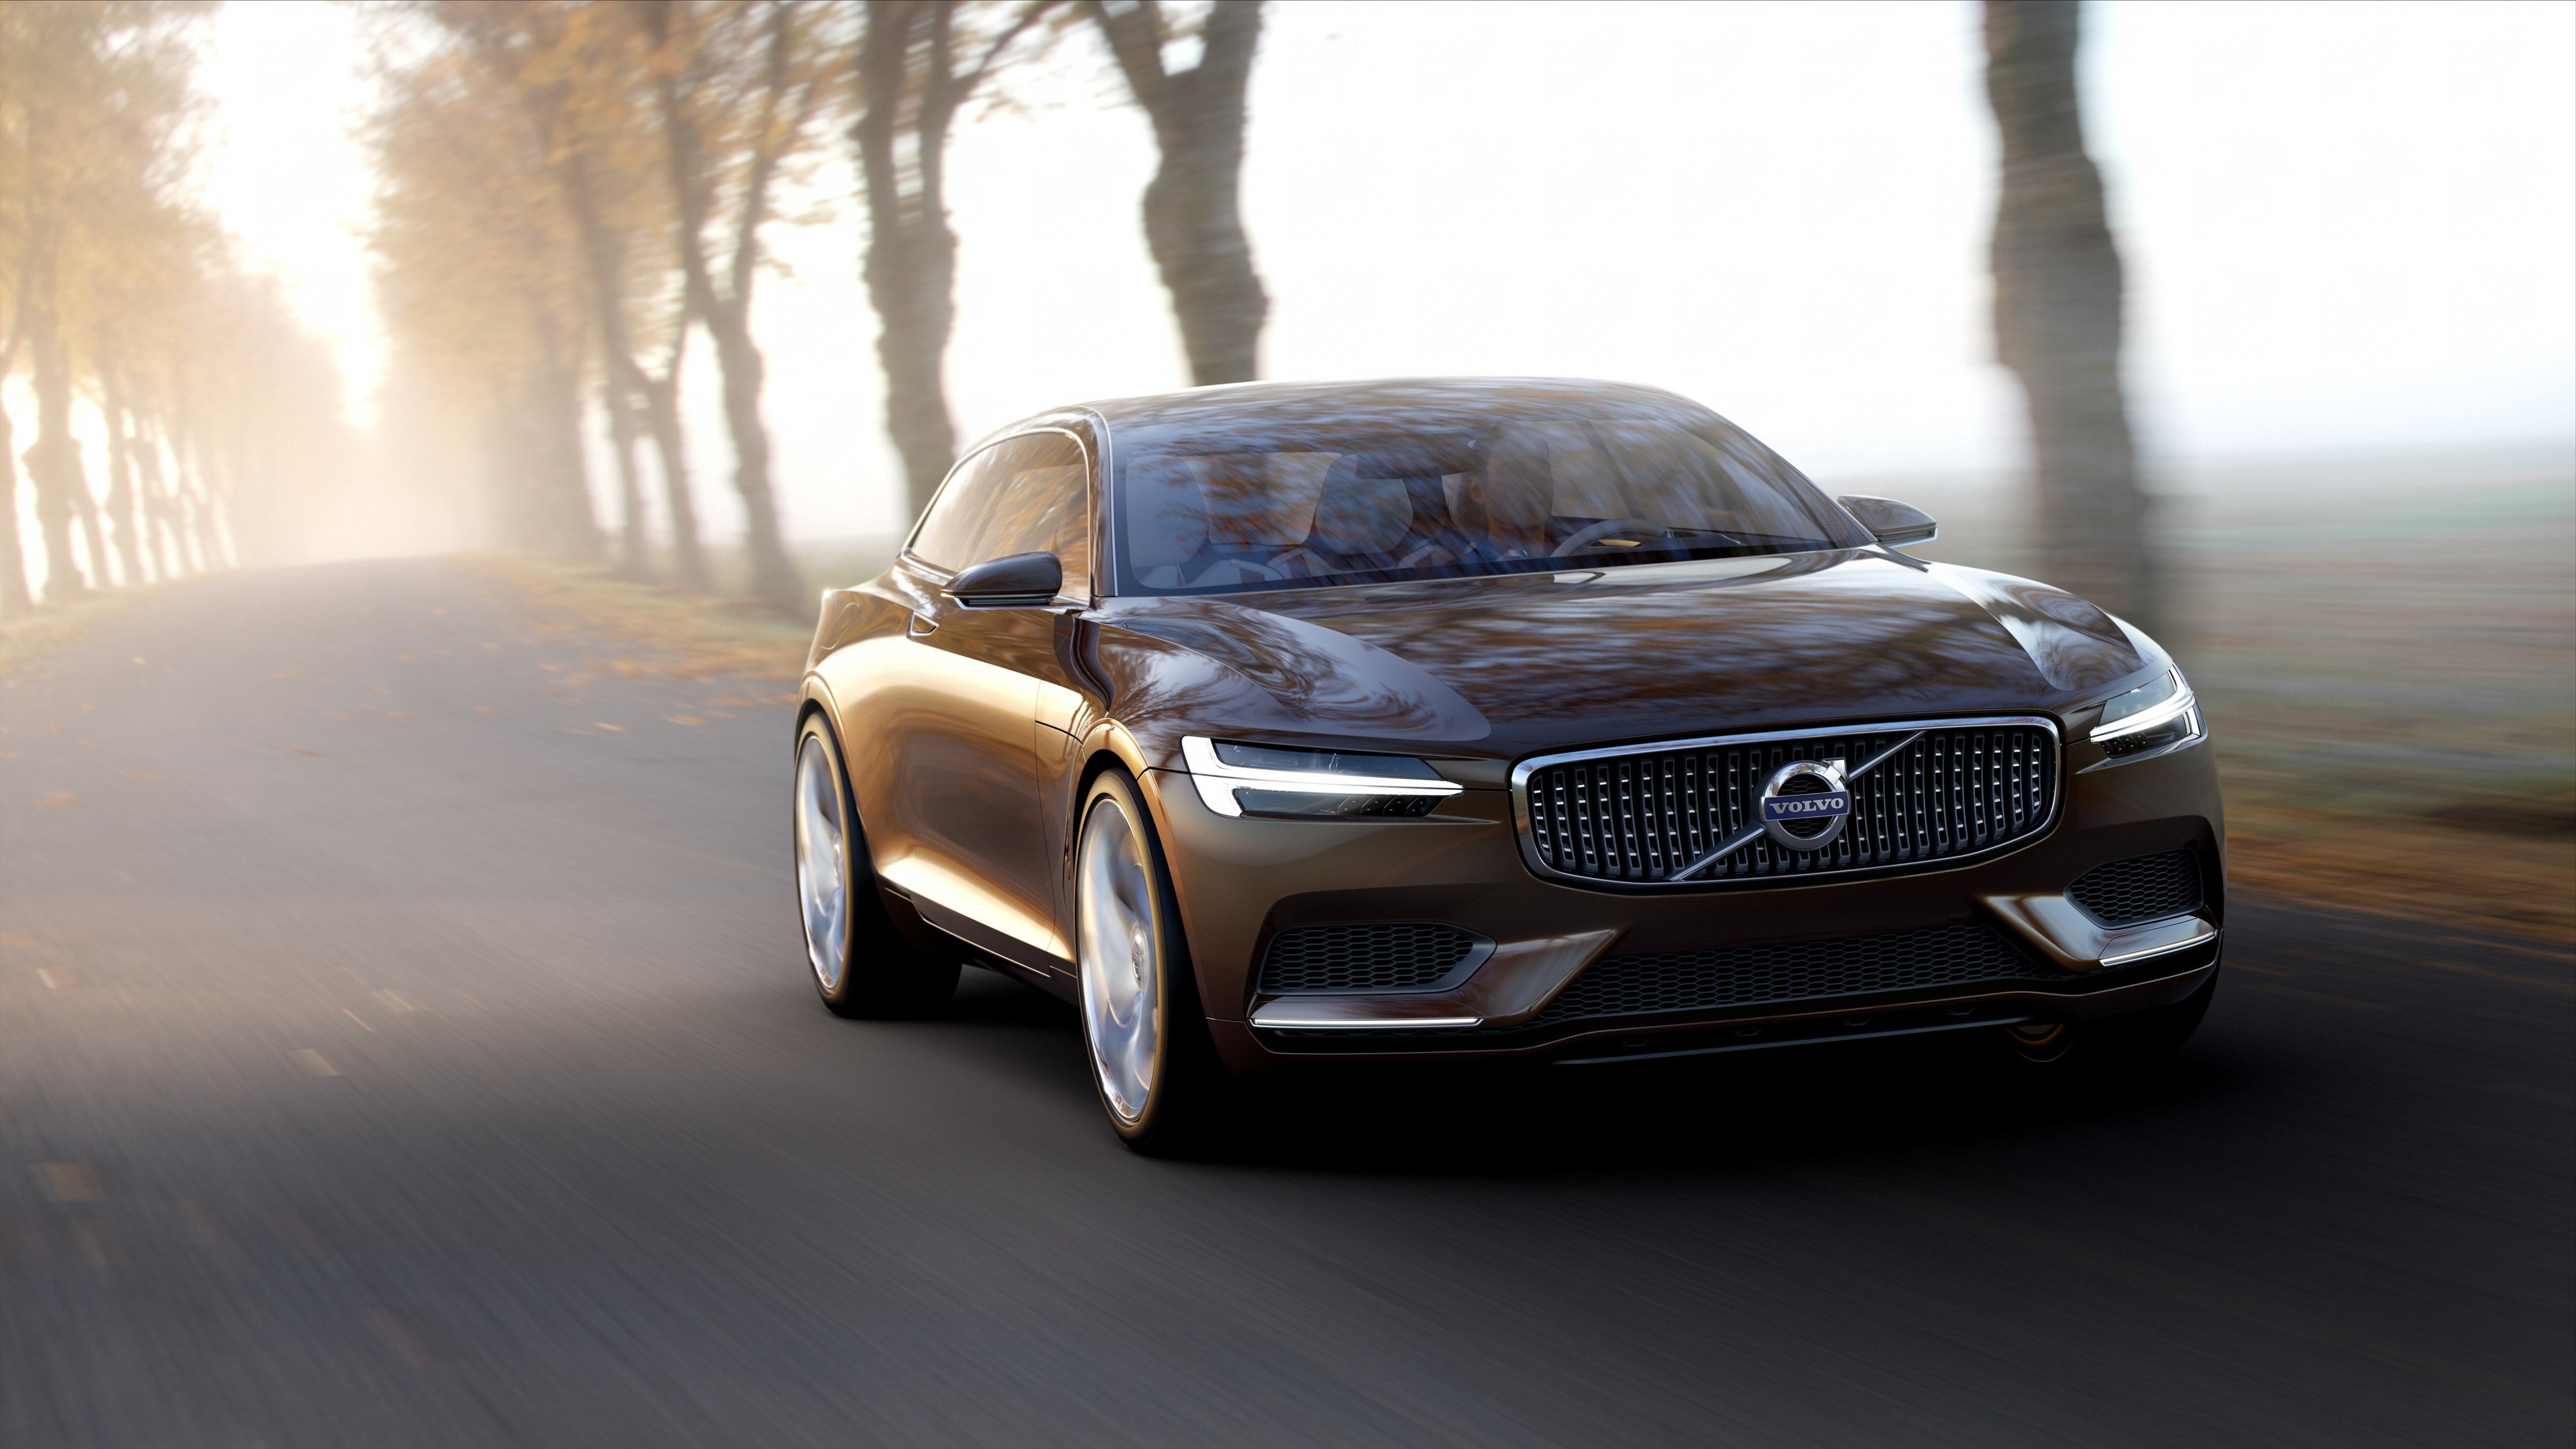 gold Volvo coupe along highway, Volvo S90, sedan, test drive